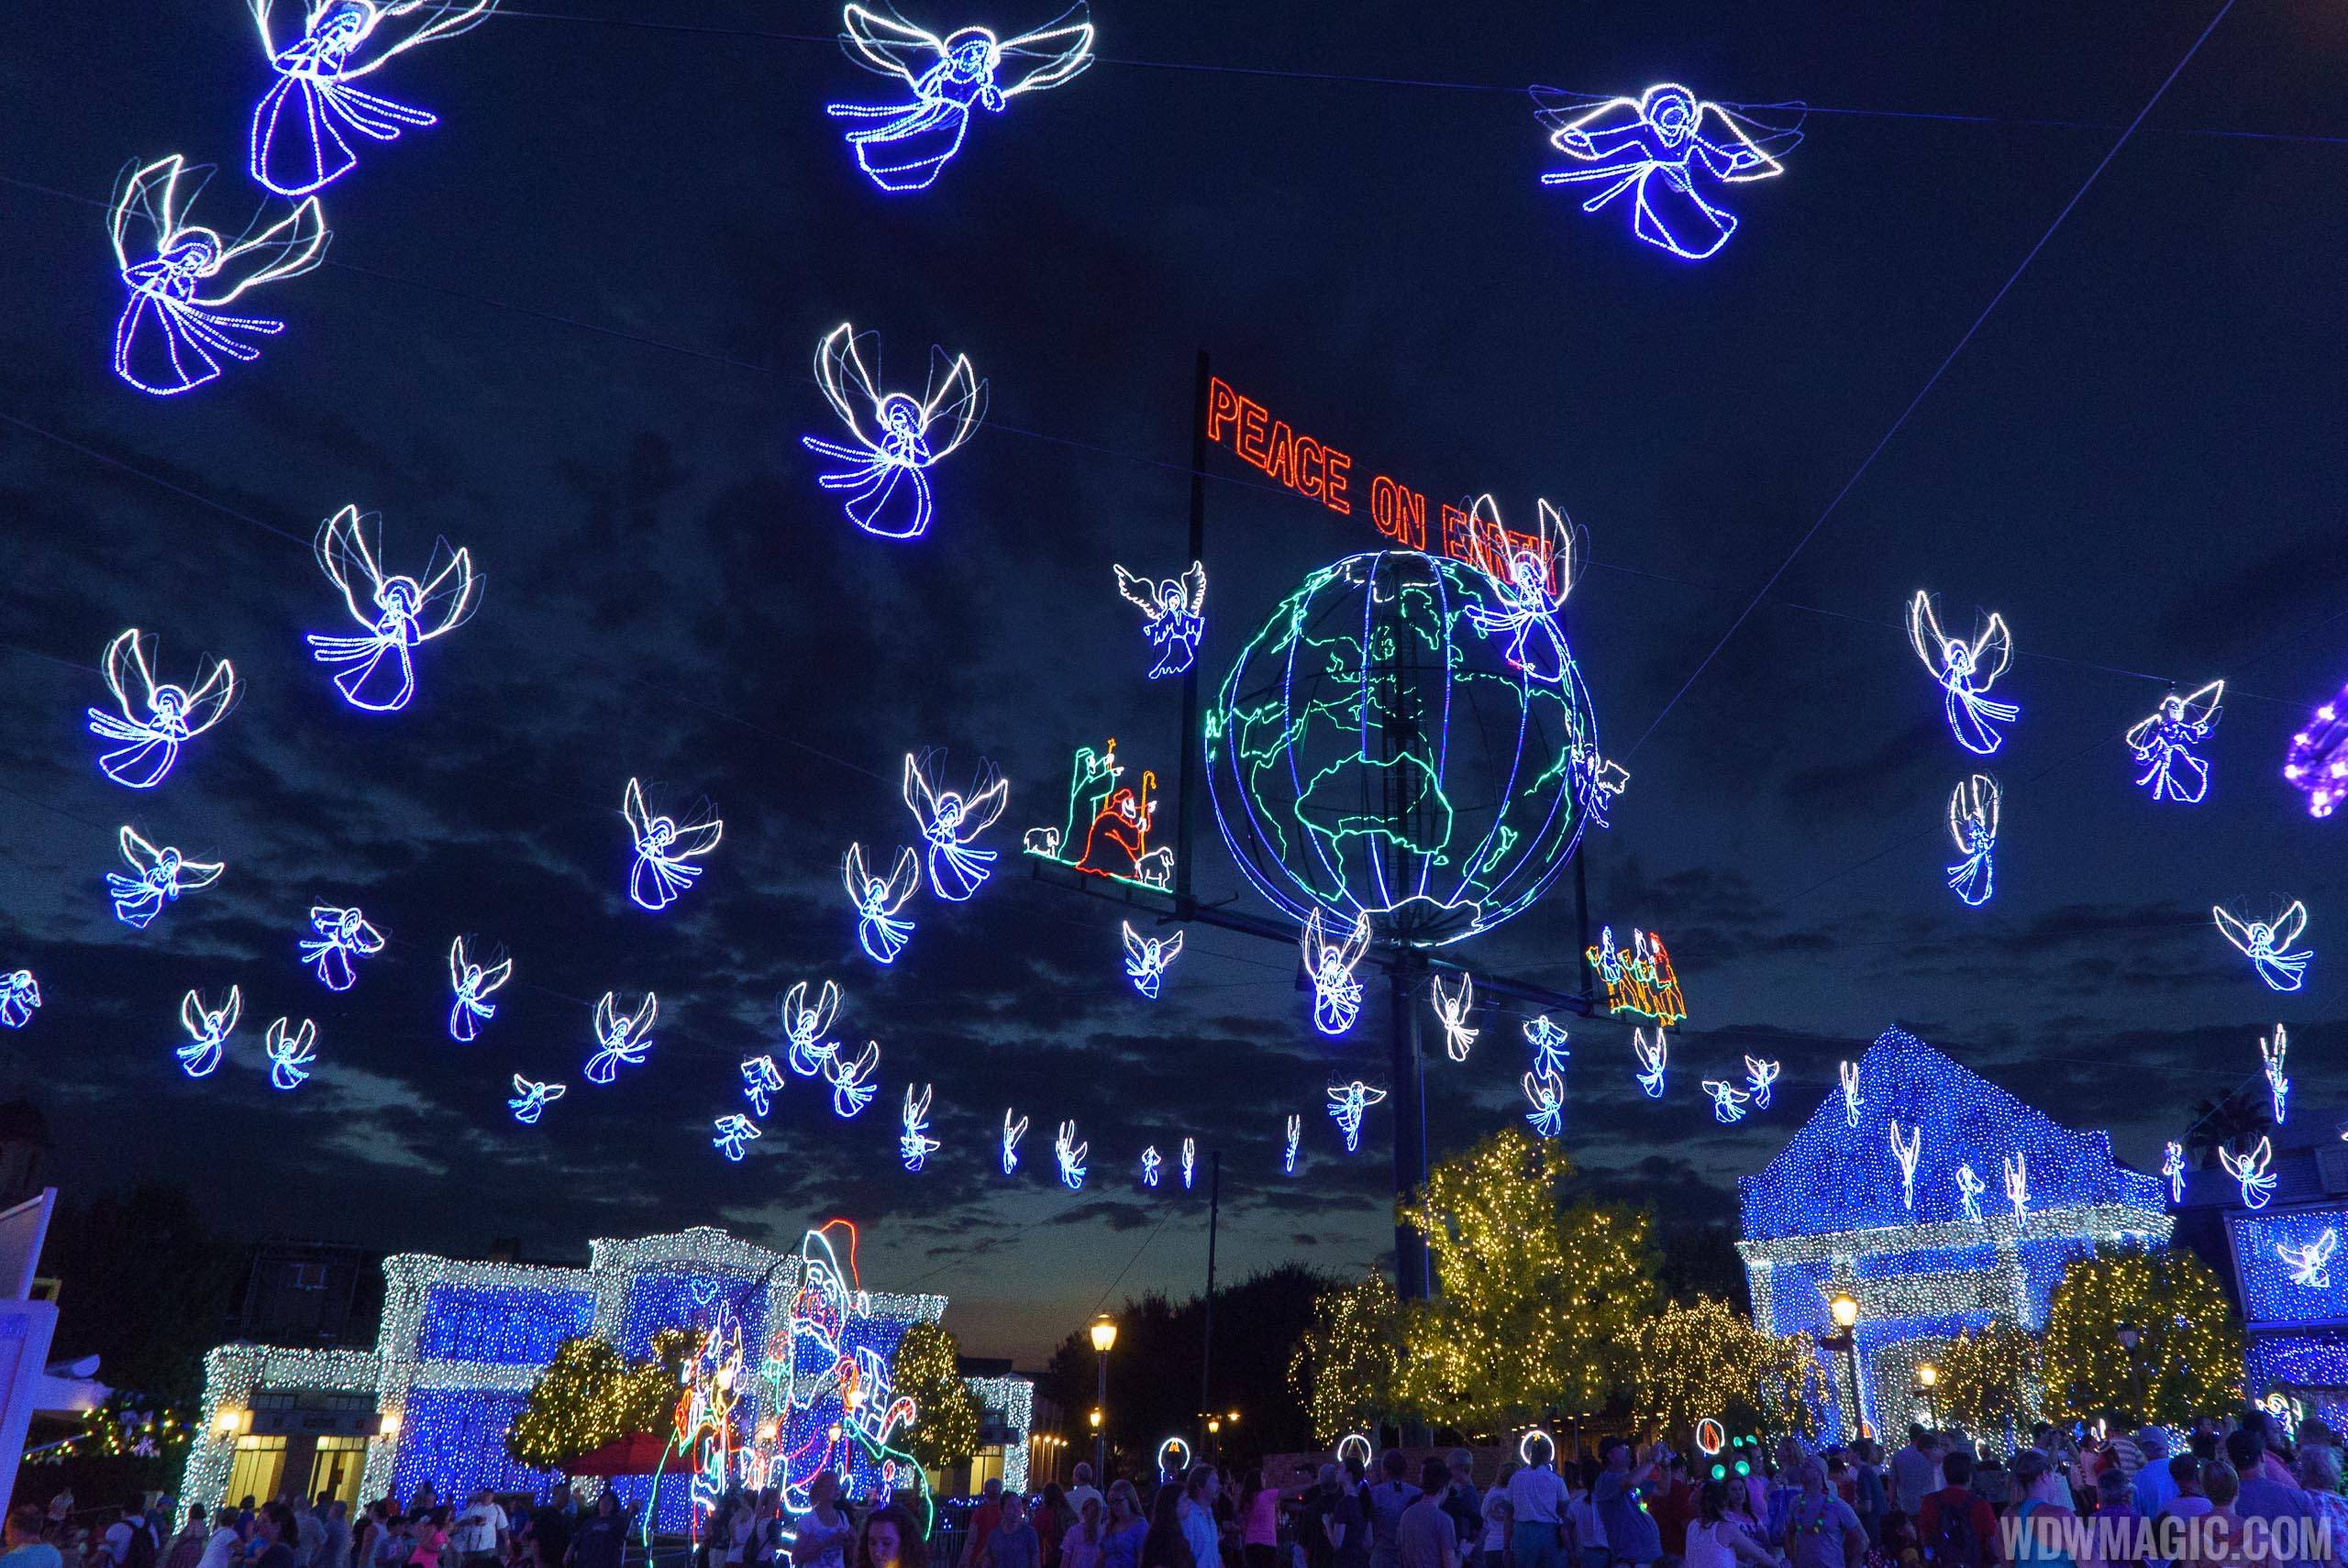 Osborne Family Spectacle of Dancing Lights 2015 show